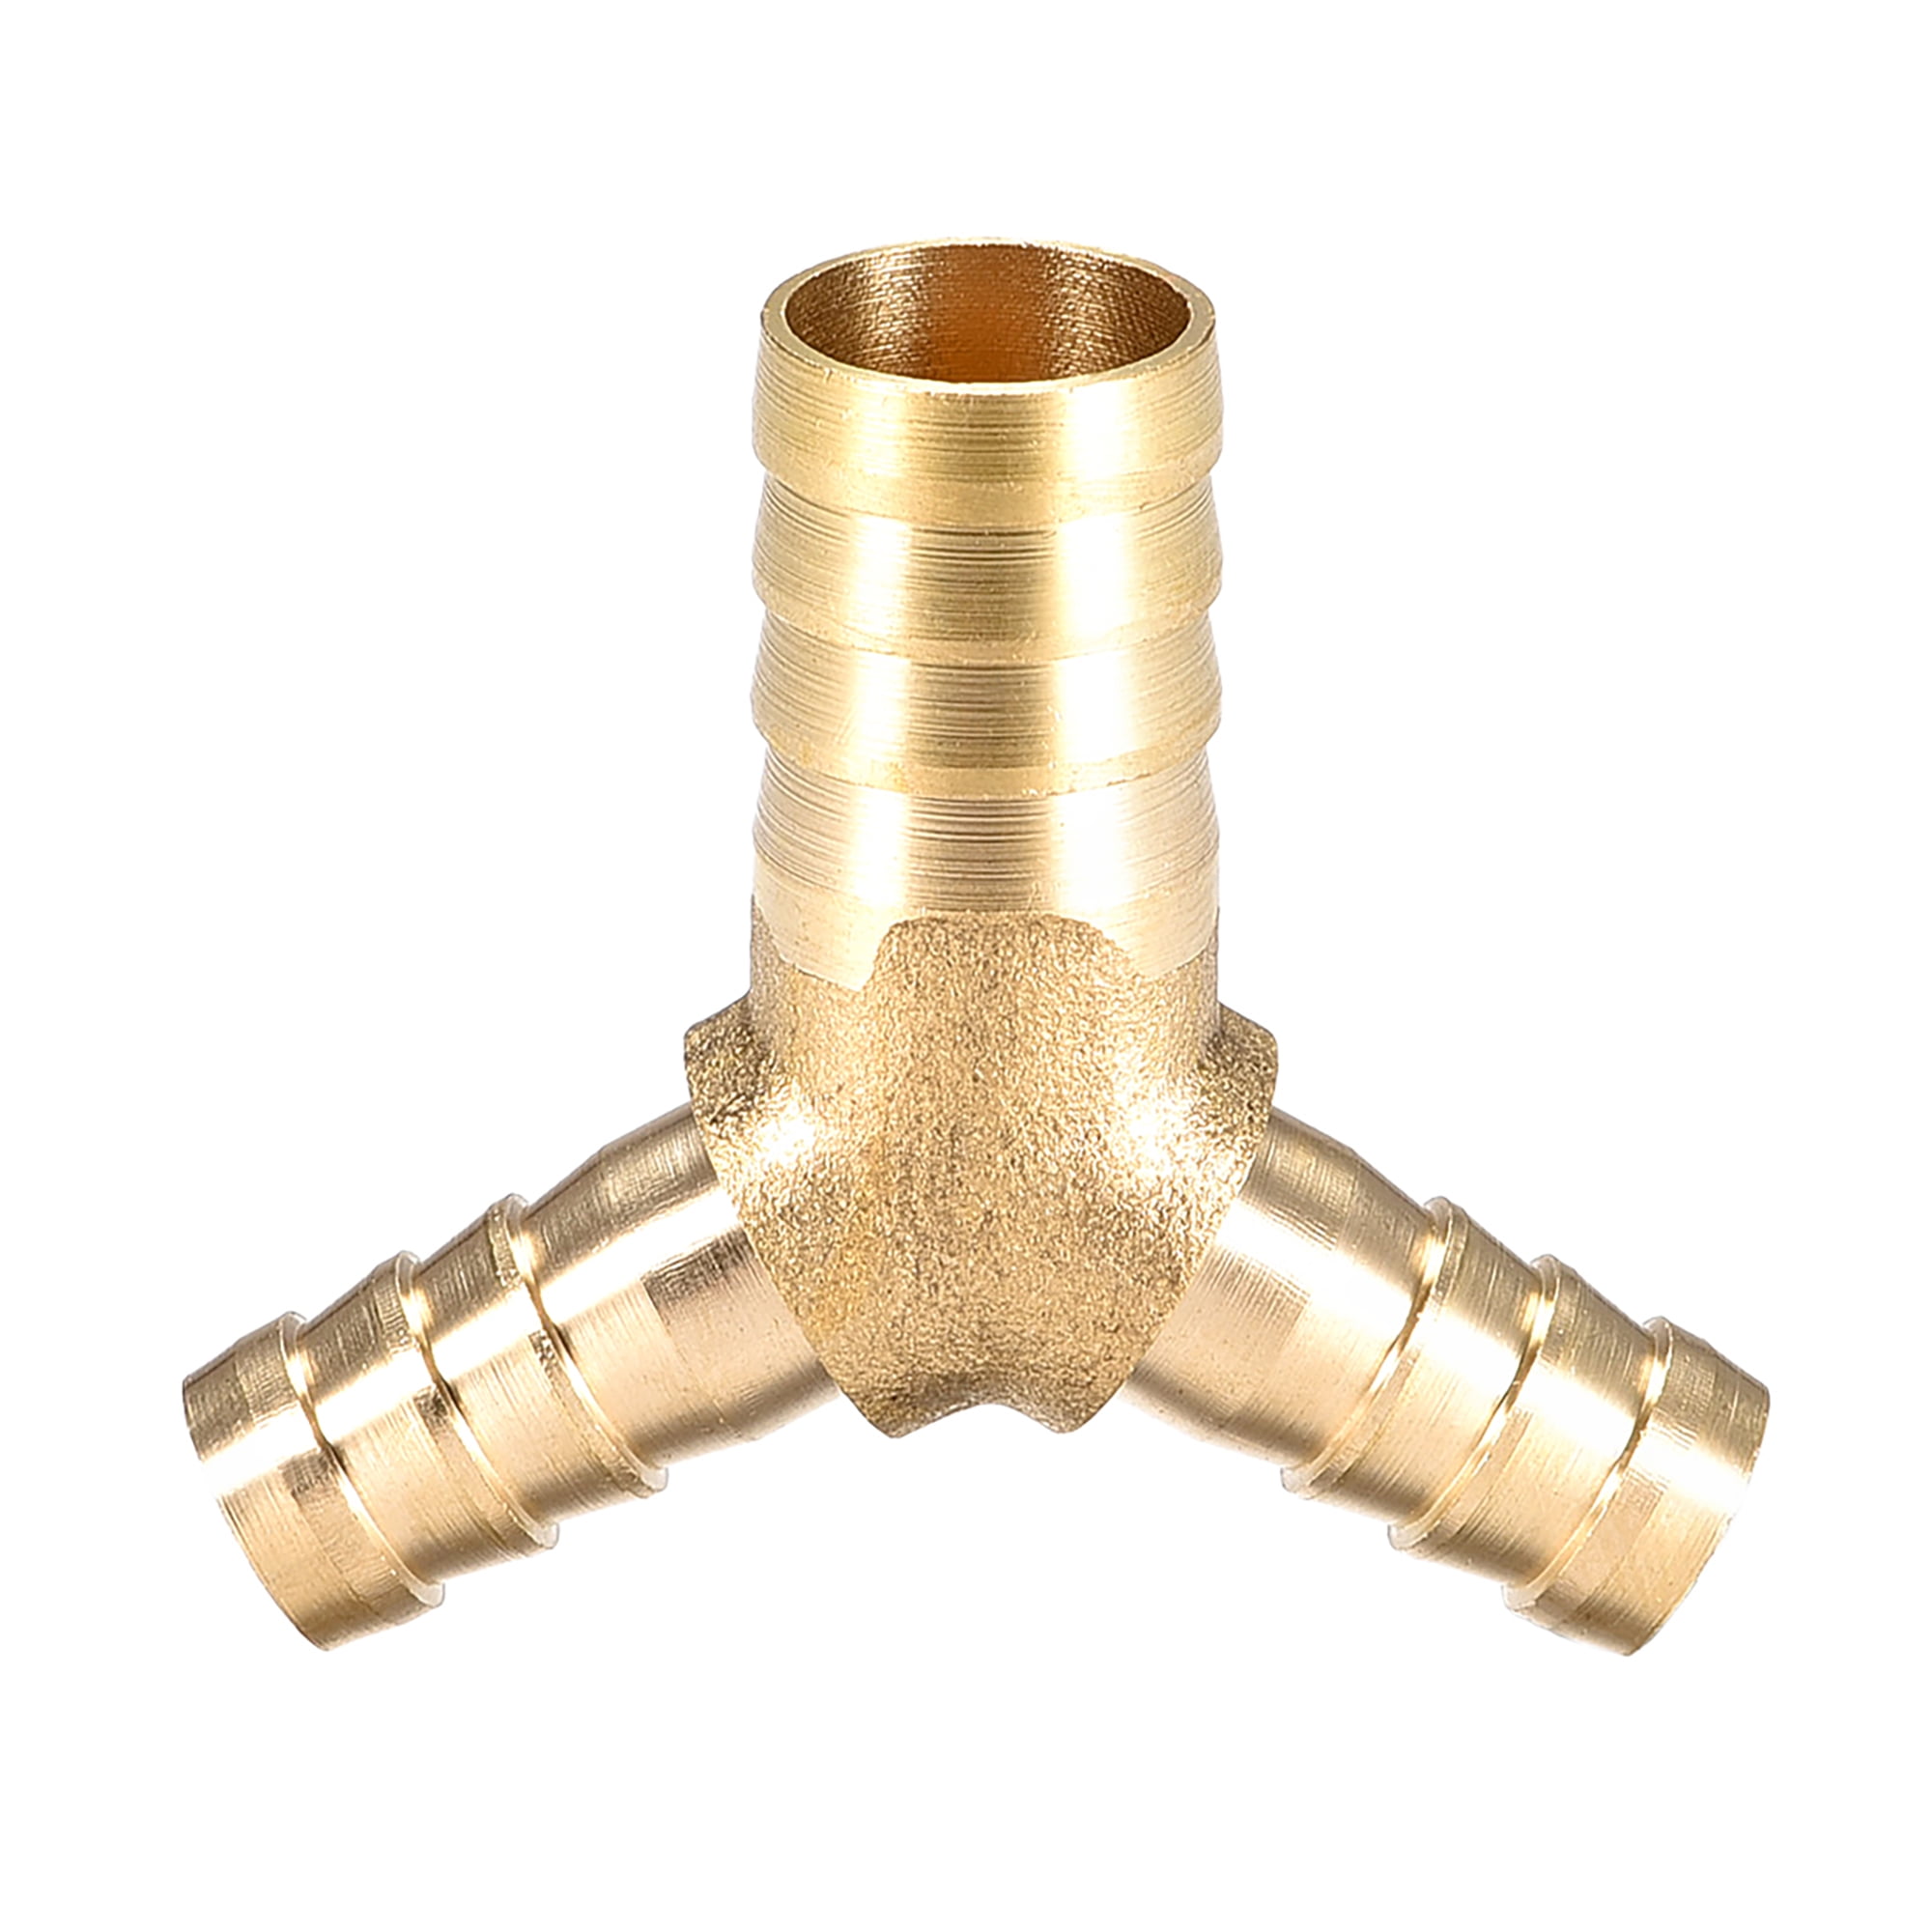 Details about   Metal Hose Joiner Barbed Brass Connector Reducer Fitting Air Fuel Water Oil Pipe 